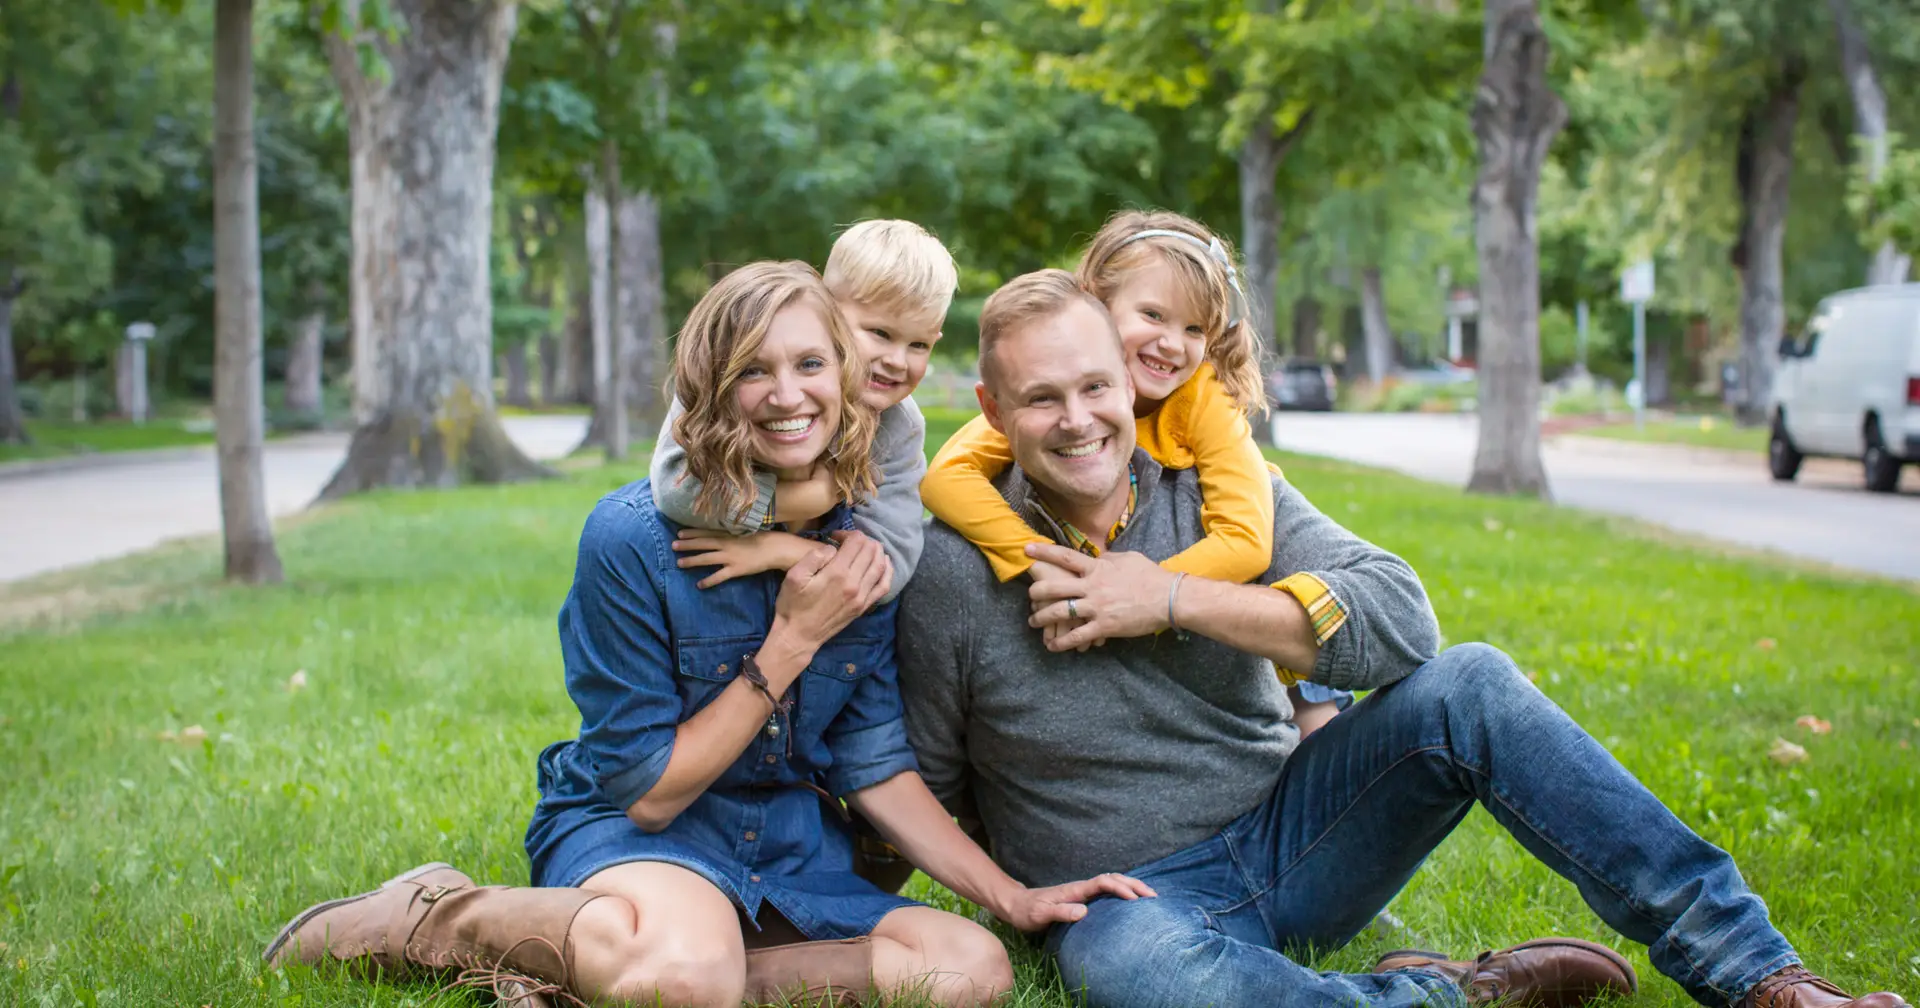 Family of four with small children in Denver, Colorado